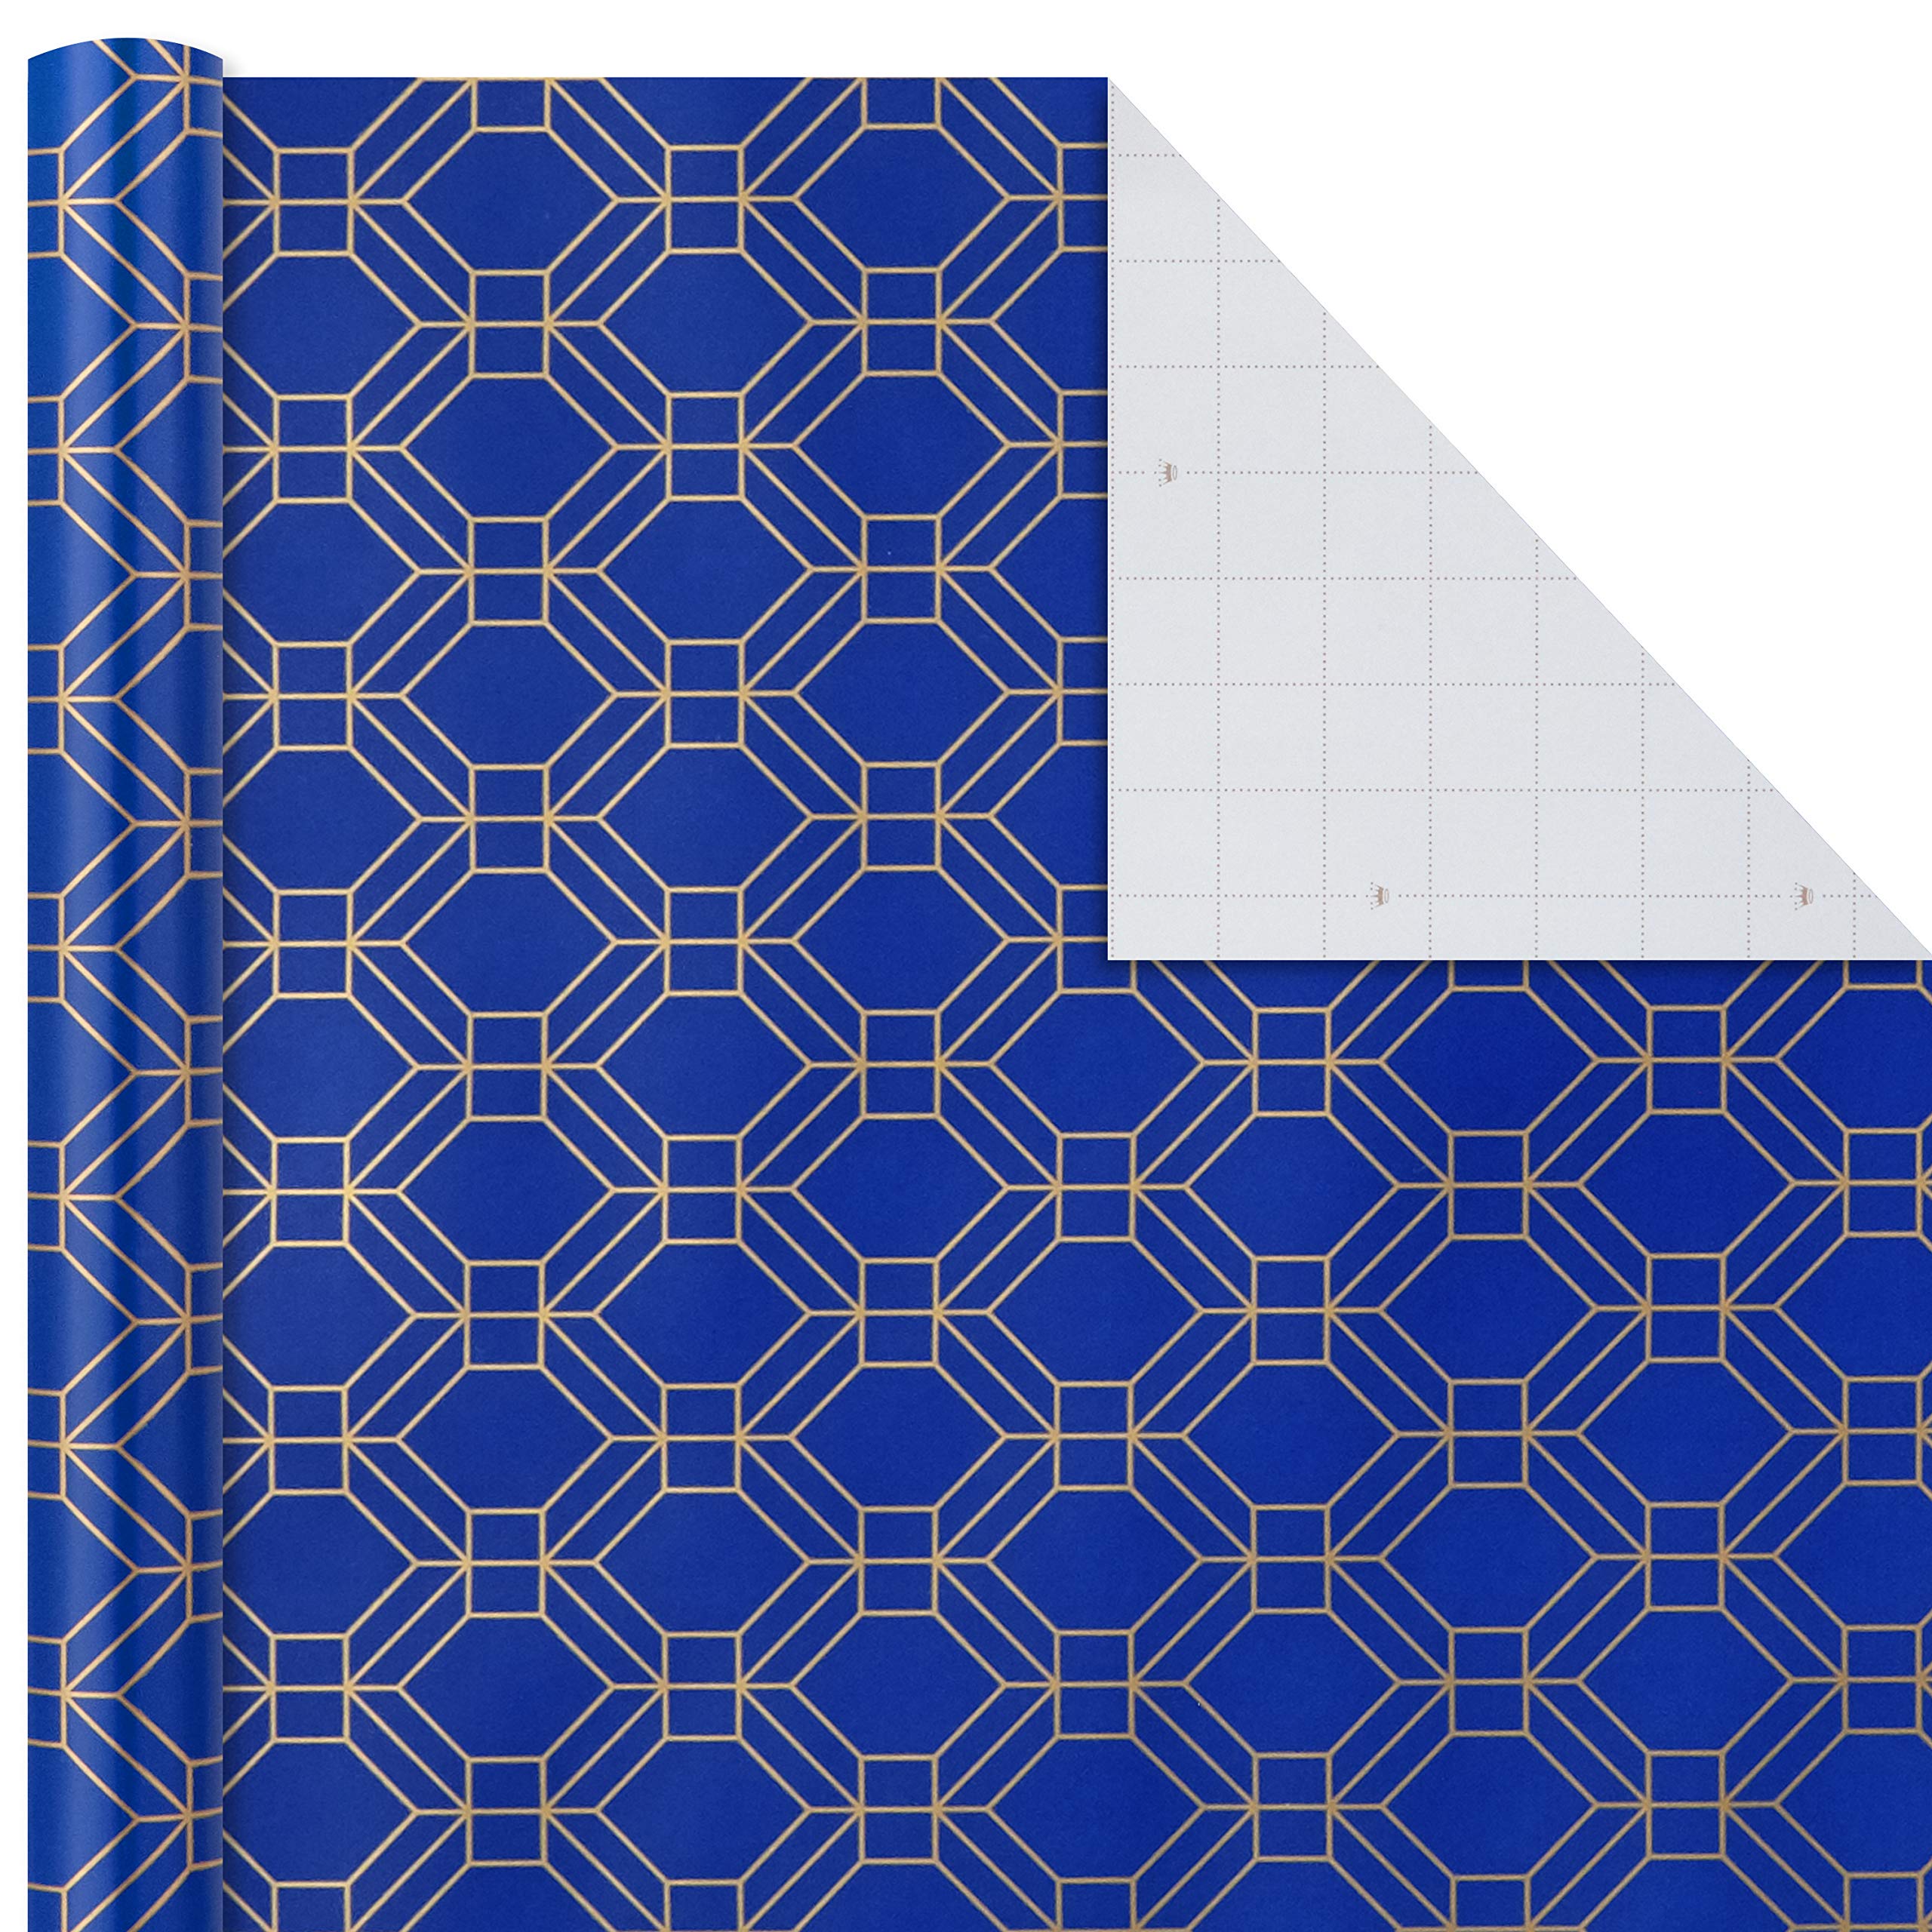 Hallmark All Occasion Wrapping Paper Bundle with Cut Lines on Reverse - Dark Blue and Gold Stripes (3-Pack: 105 sq. ft. ttl.) for Christmas, Hanukkah, Birthdays, Graduations, Father's Day, Weddings